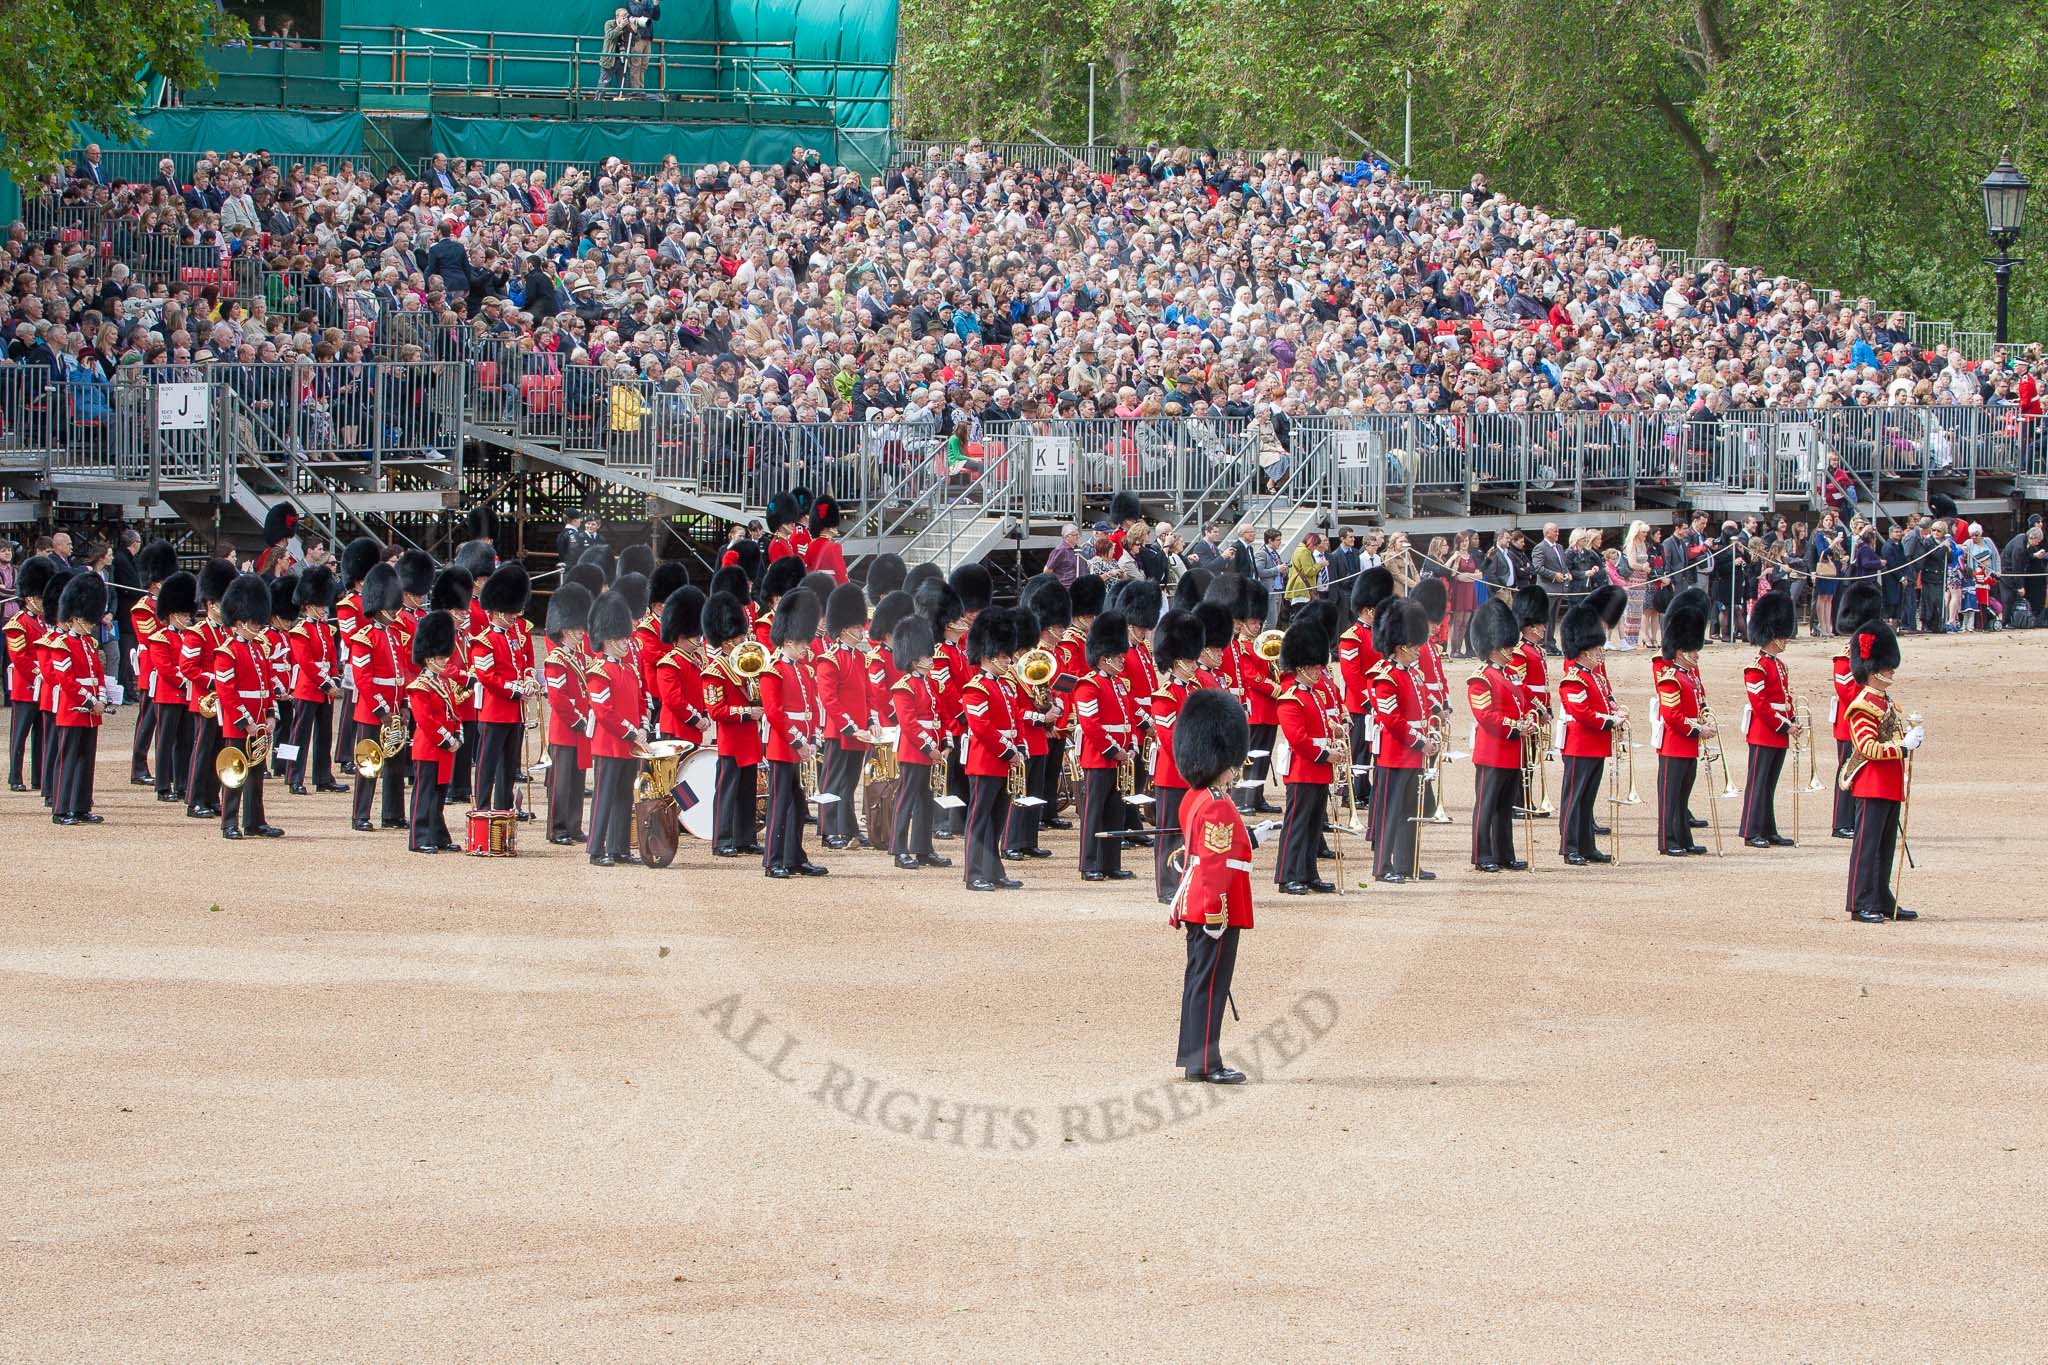 The Colonel's Review 2012: Two of the Massed Bands, the band of the Welsh Guards and the Band of the Scots Guards, already in place at Horse Guards Parade. In front GSM 'Billy' Mott..
Horse Guards Parade, Westminster,
London SW1,

United Kingdom,
on 09 June 2012 at 10:23, image #50